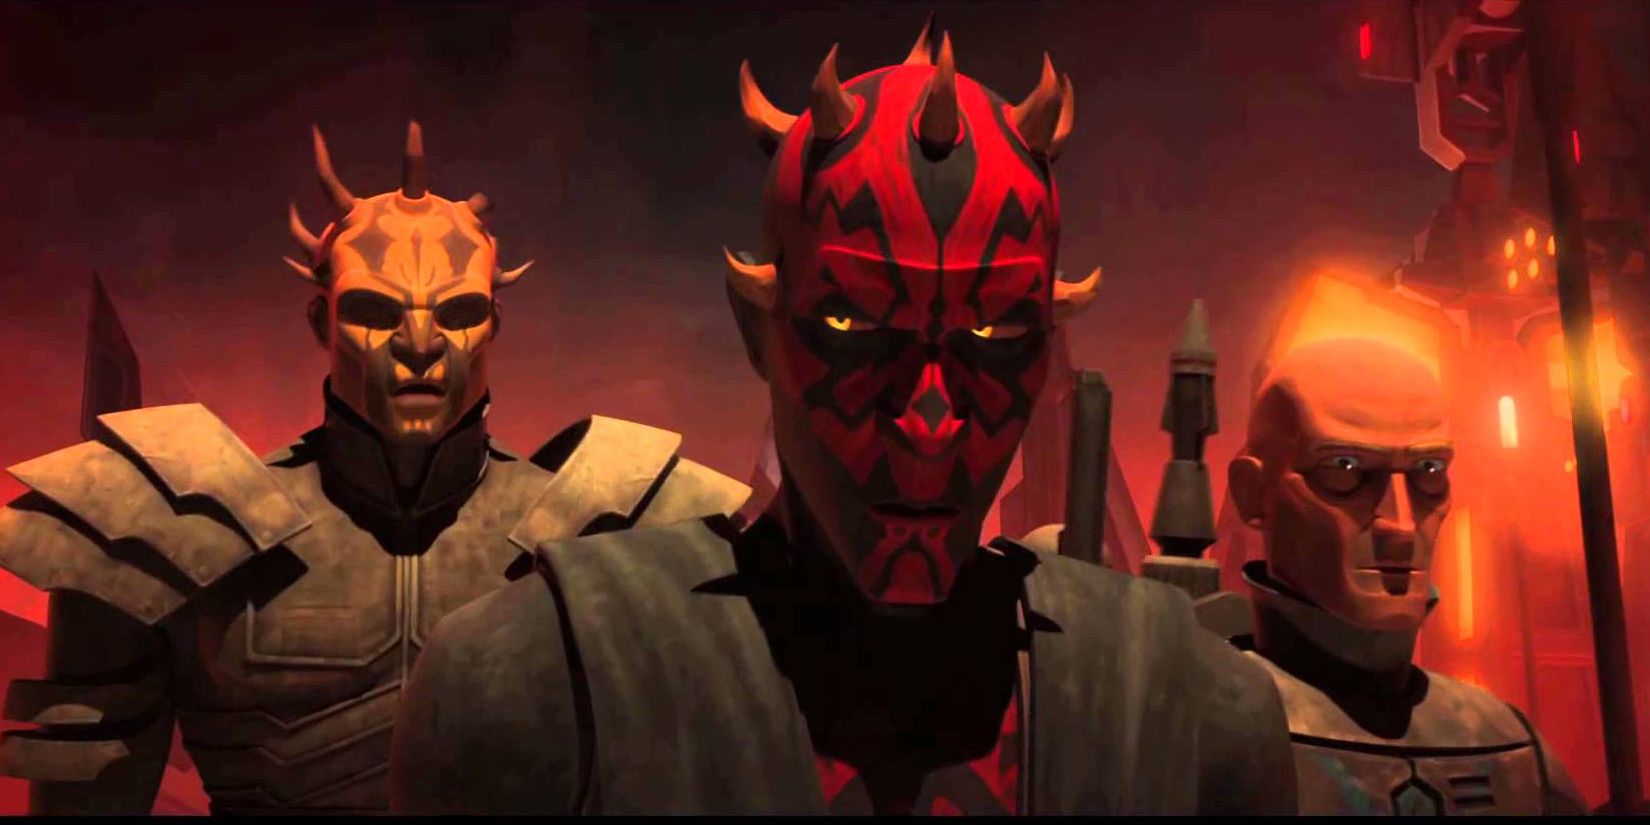 Darth Maul in front of Savage Opress and Pre Vizla in The Clone Wars.